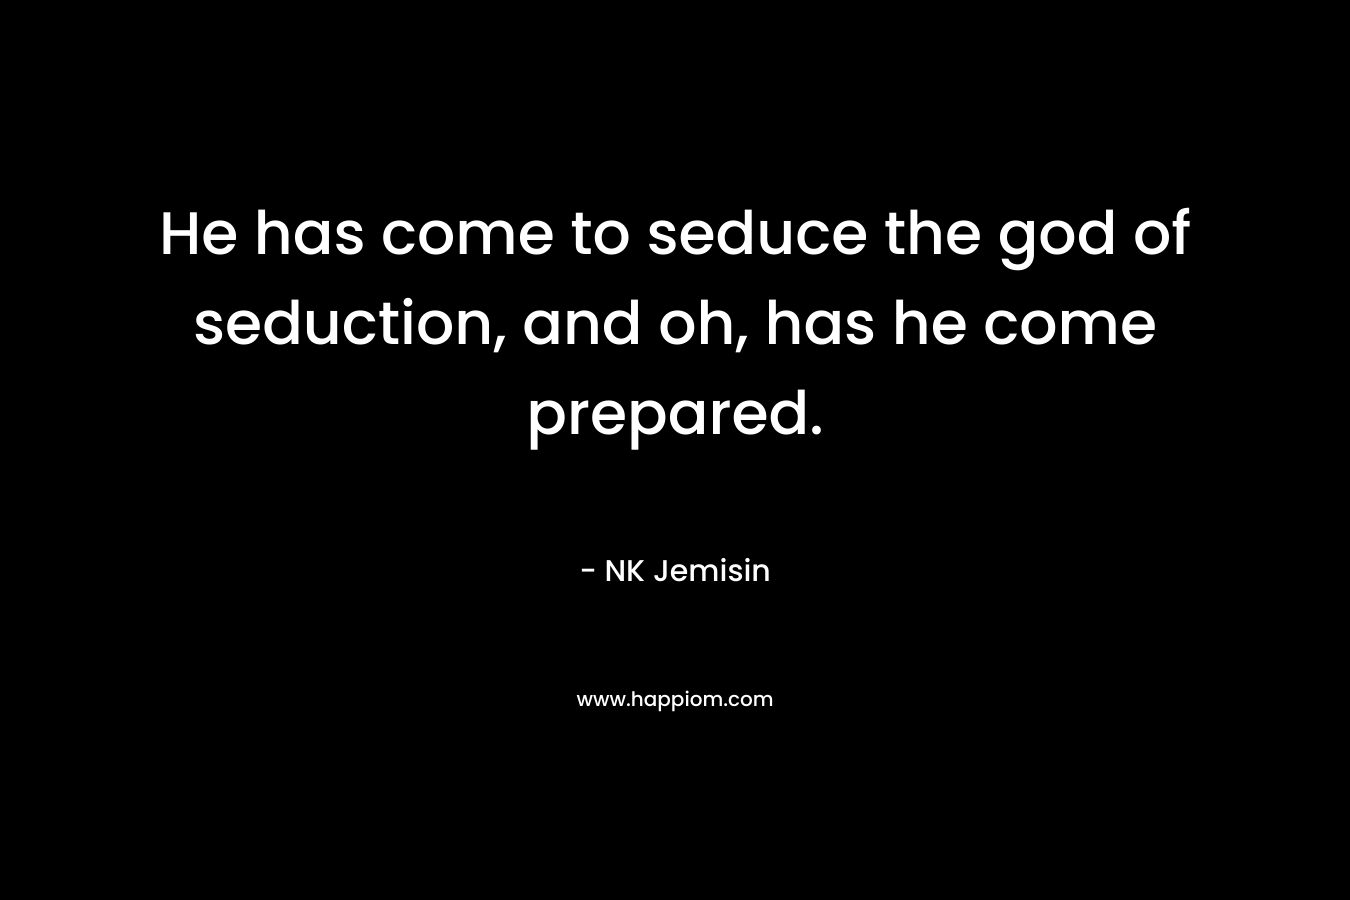 He has come to seduce the god of seduction, and oh, has he come prepared.